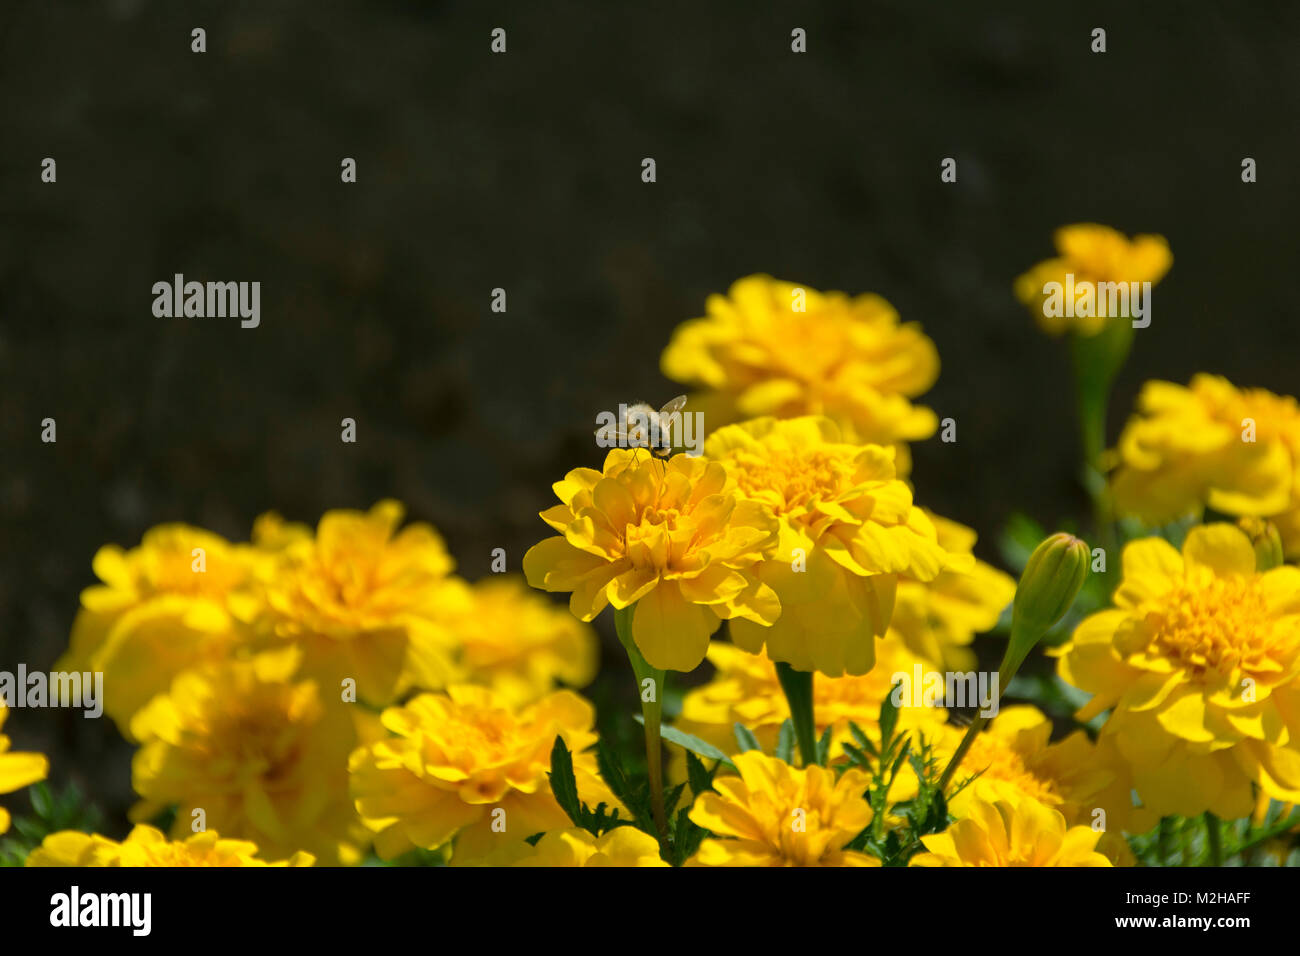 tiny silvery beefly hovering over yellow dwarf french marigold flowers with a dark blurred background Stock Photo